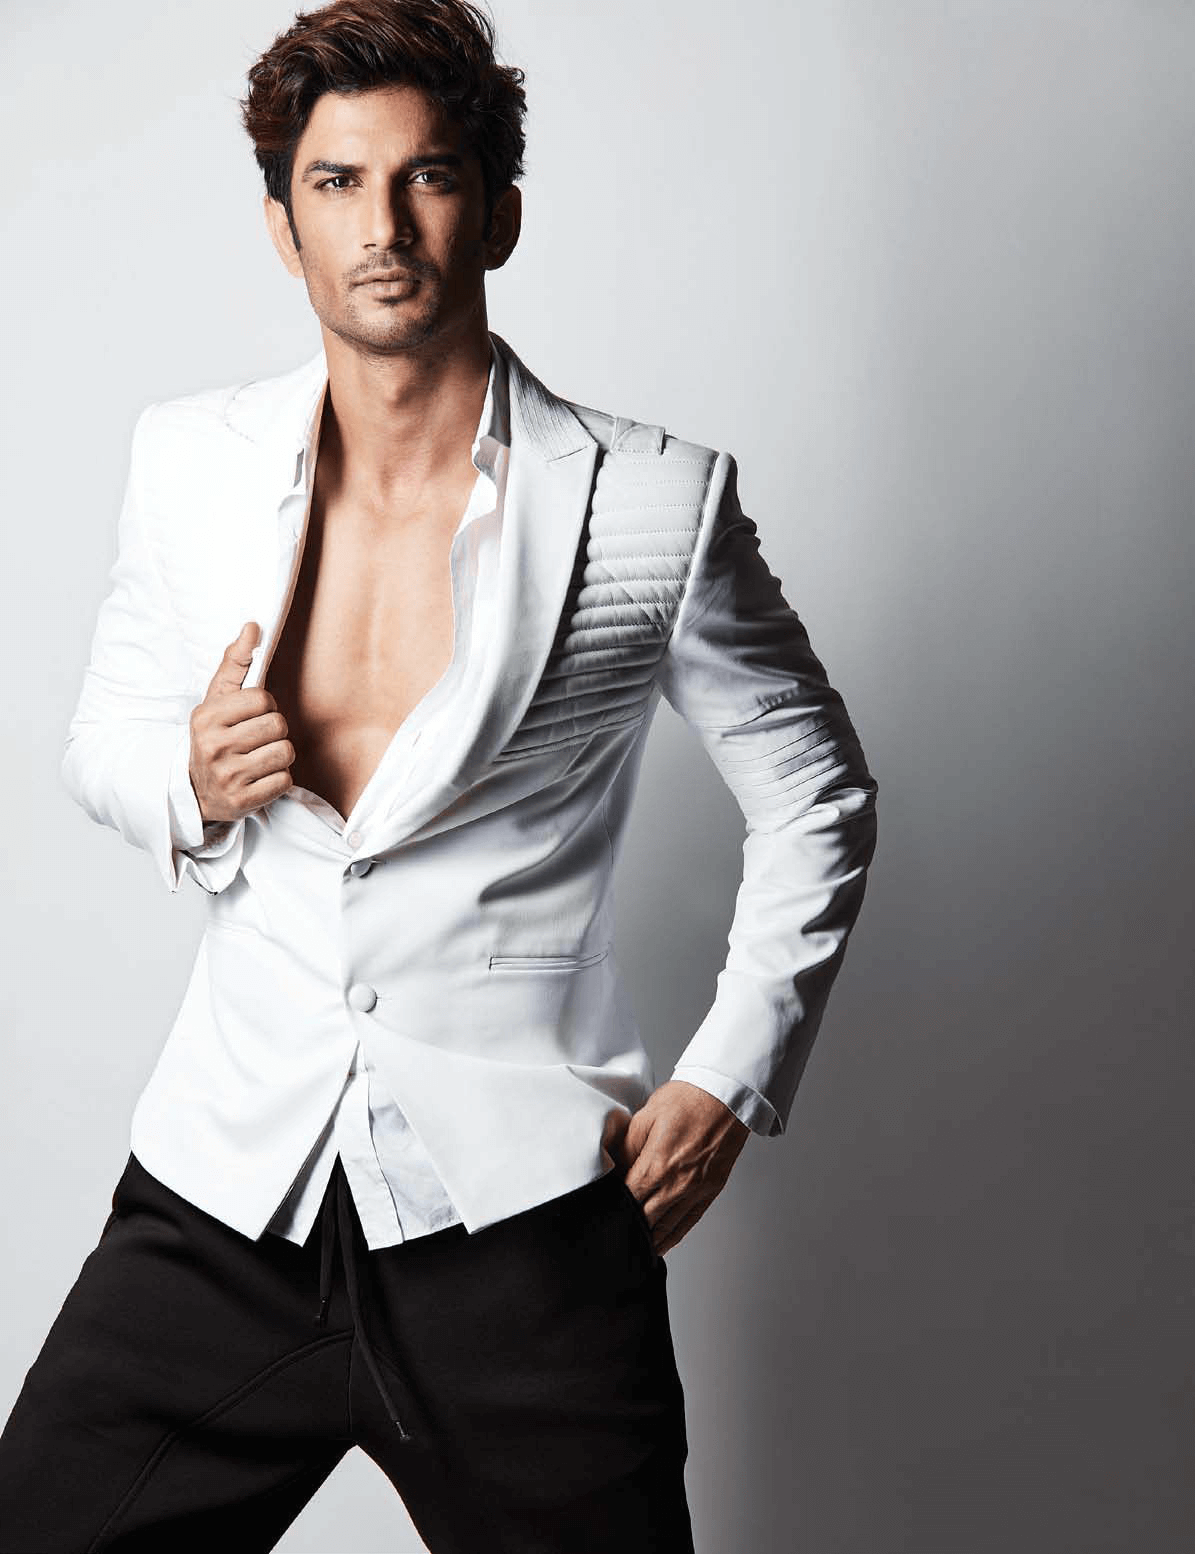 why Sushant Singh Rajput was replaced by Arjun Kapoor